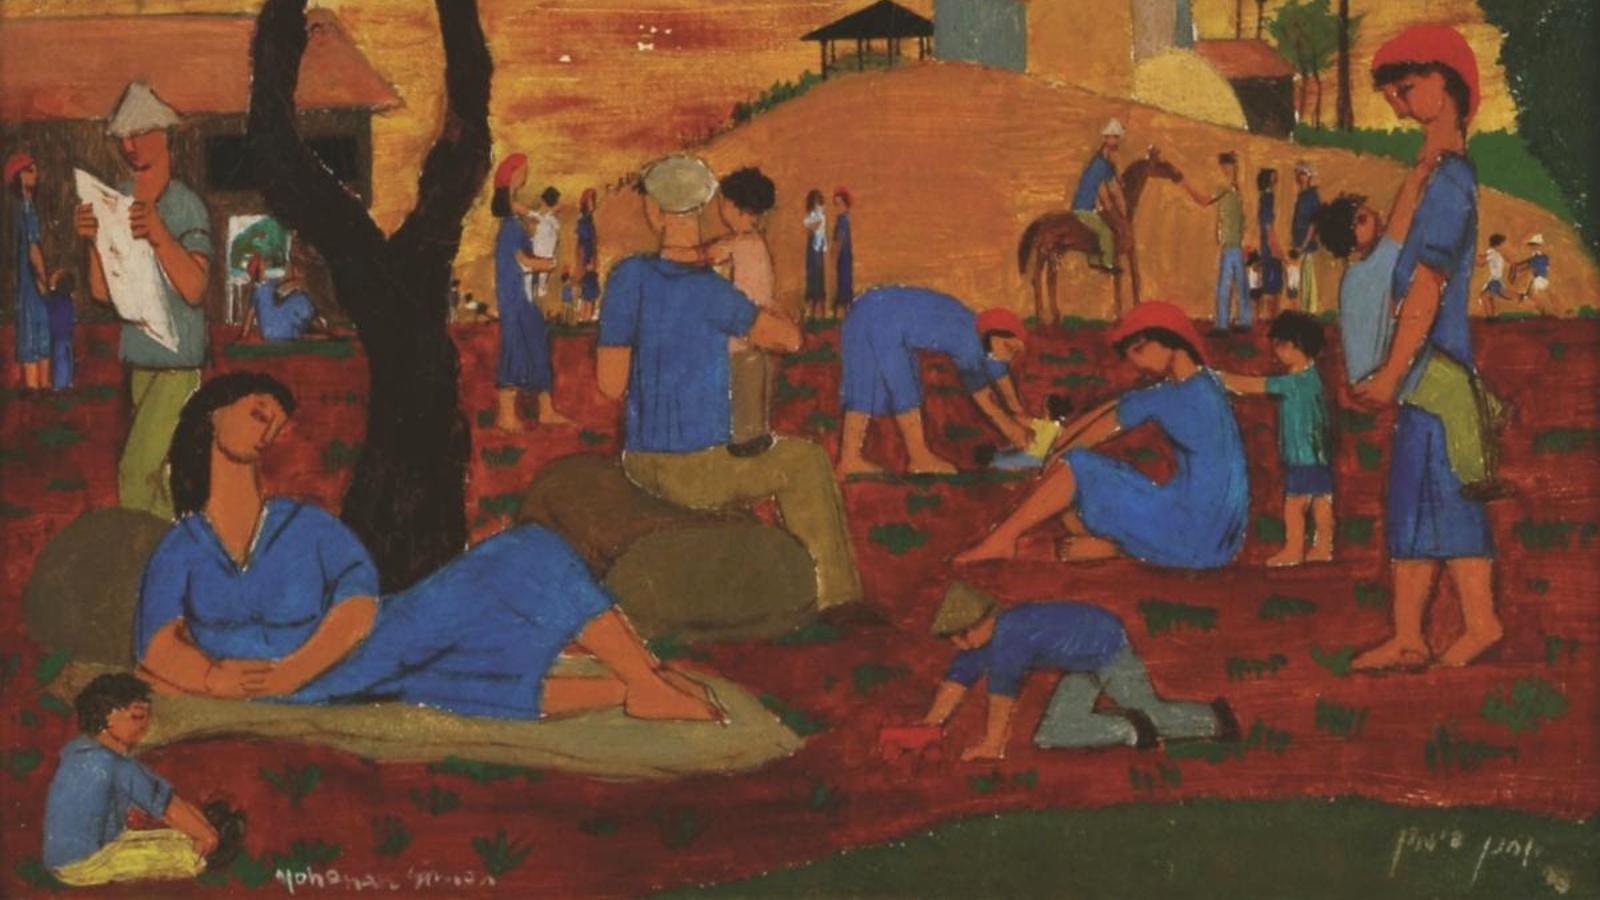 Yochanan Simon’s signed work, “Figures in the Kibbutz,” will be auctioned by Israel’s Tiroche Auction House on January 25, 2020. Photo: courtesy